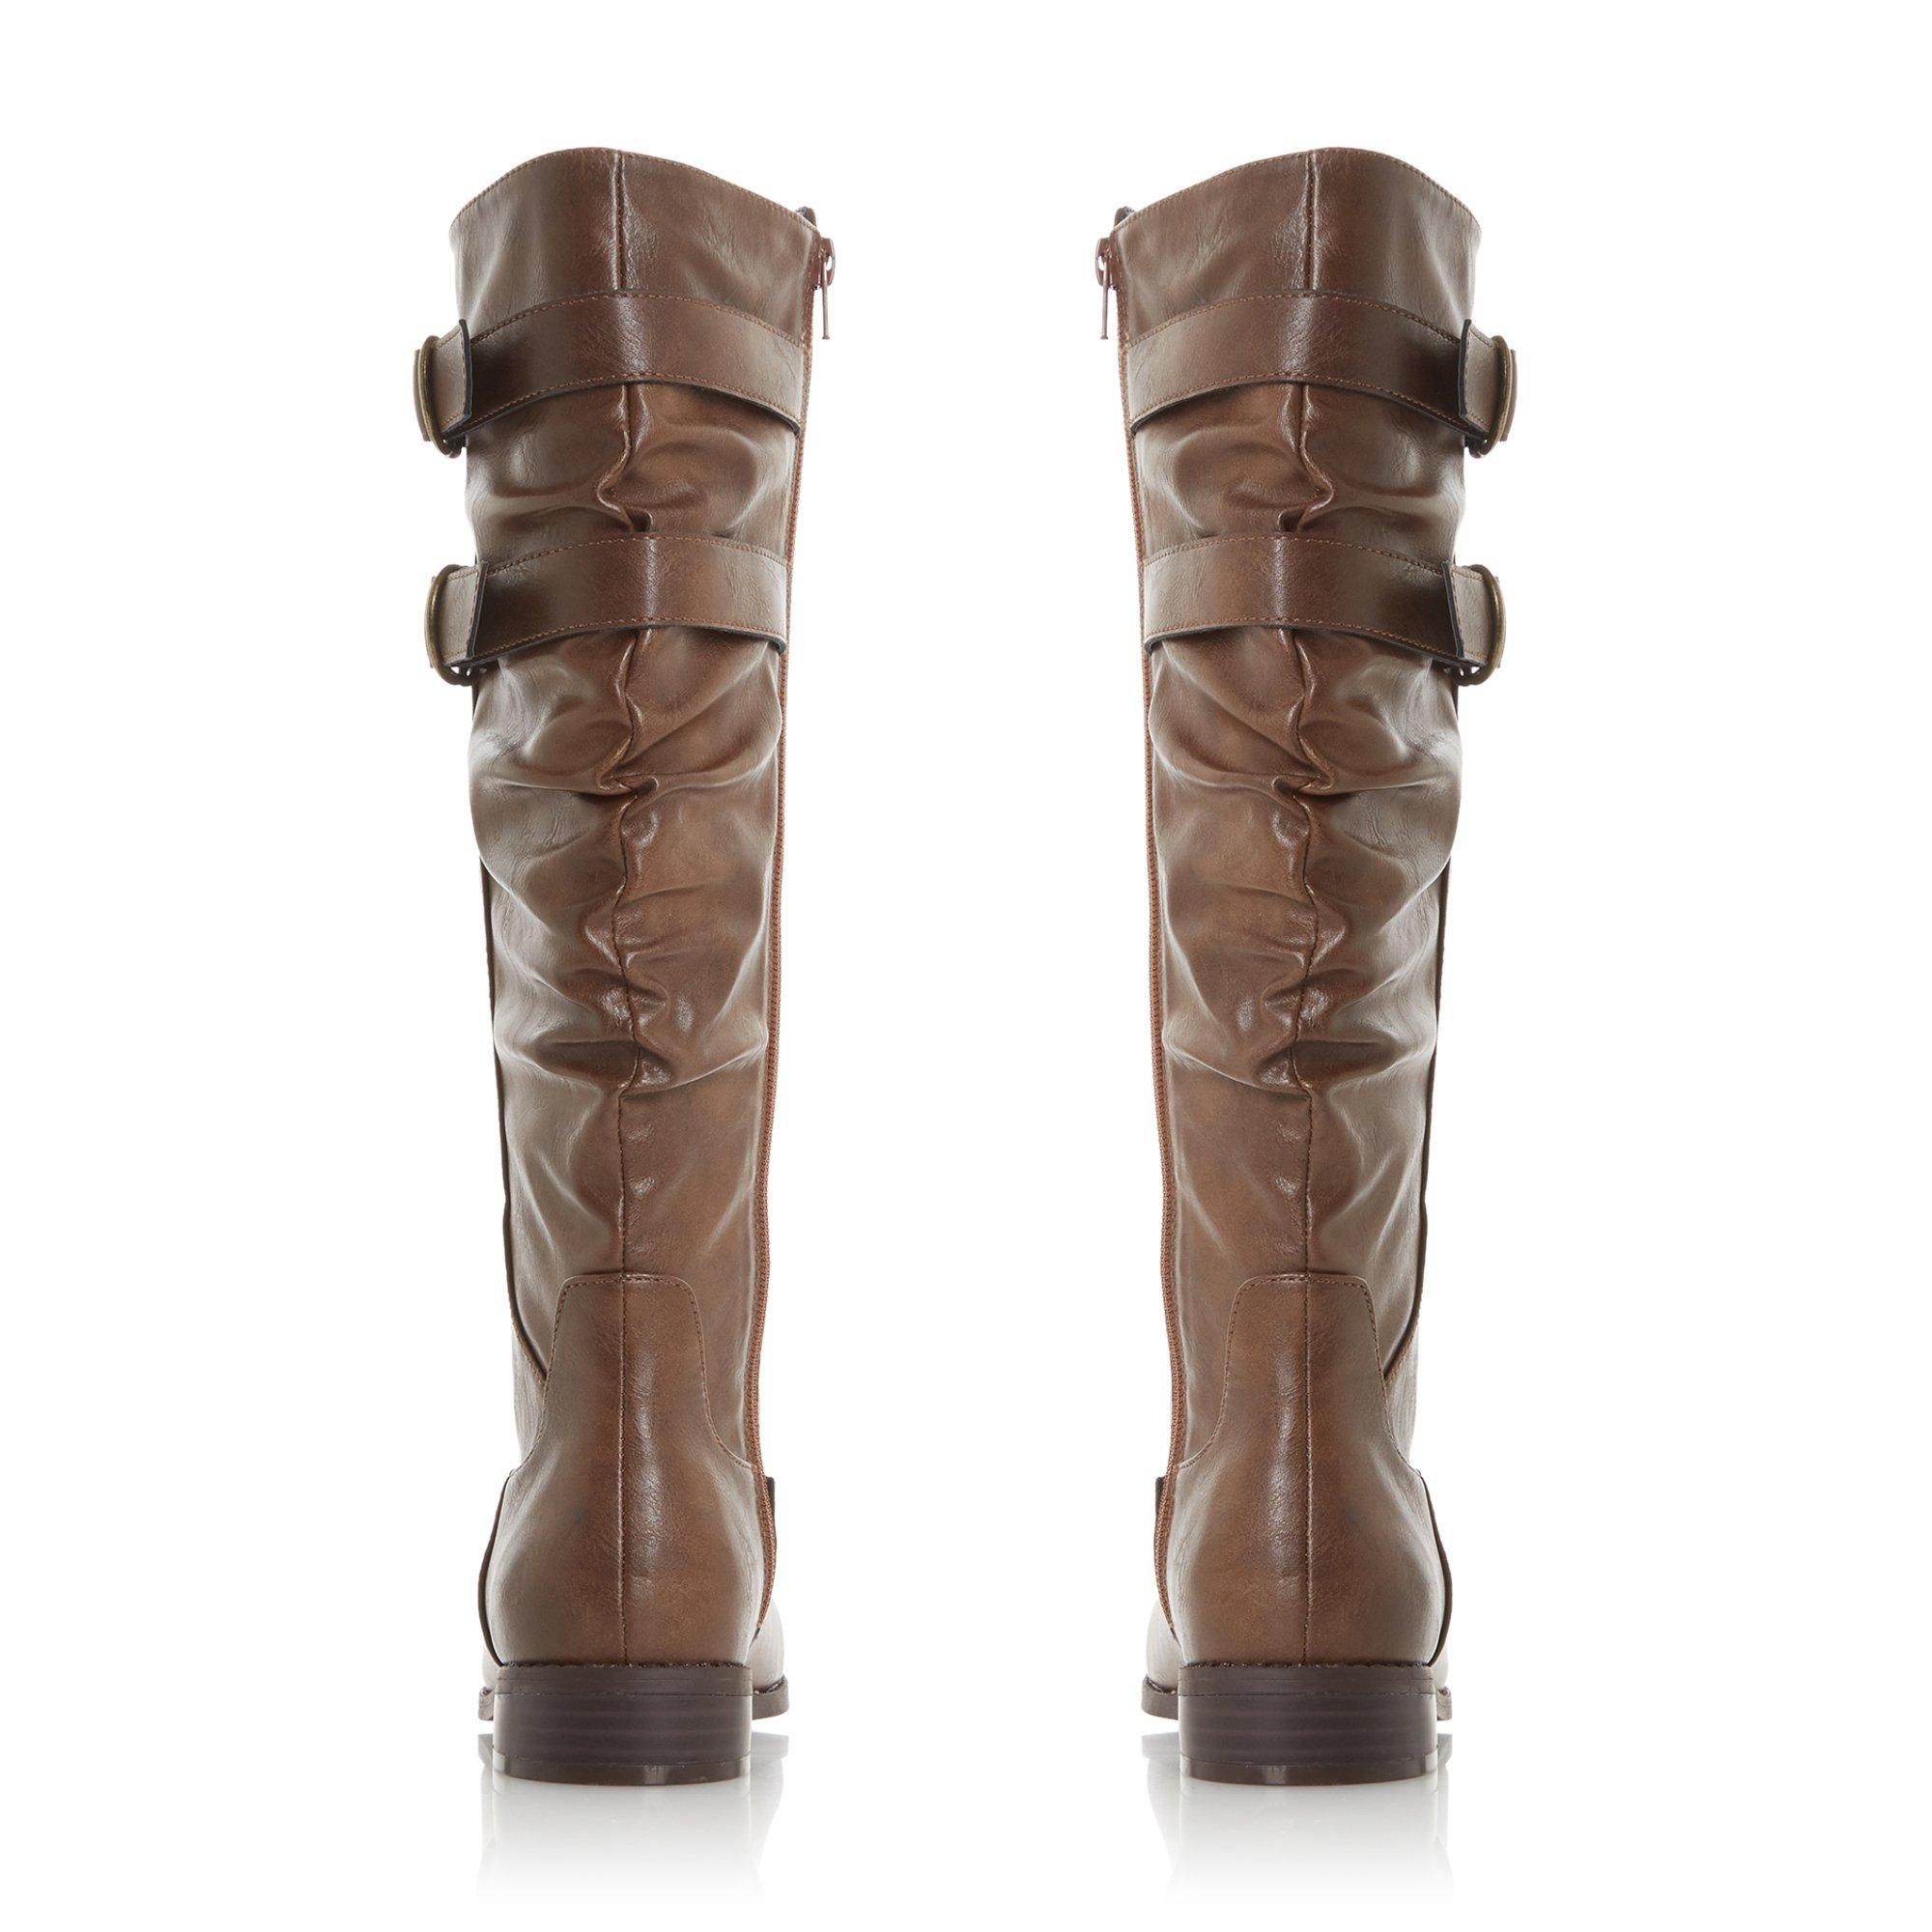 Buckle into Autumn. Knee high boots are back with Tobi. Make a statement in these traffic stopping boots.